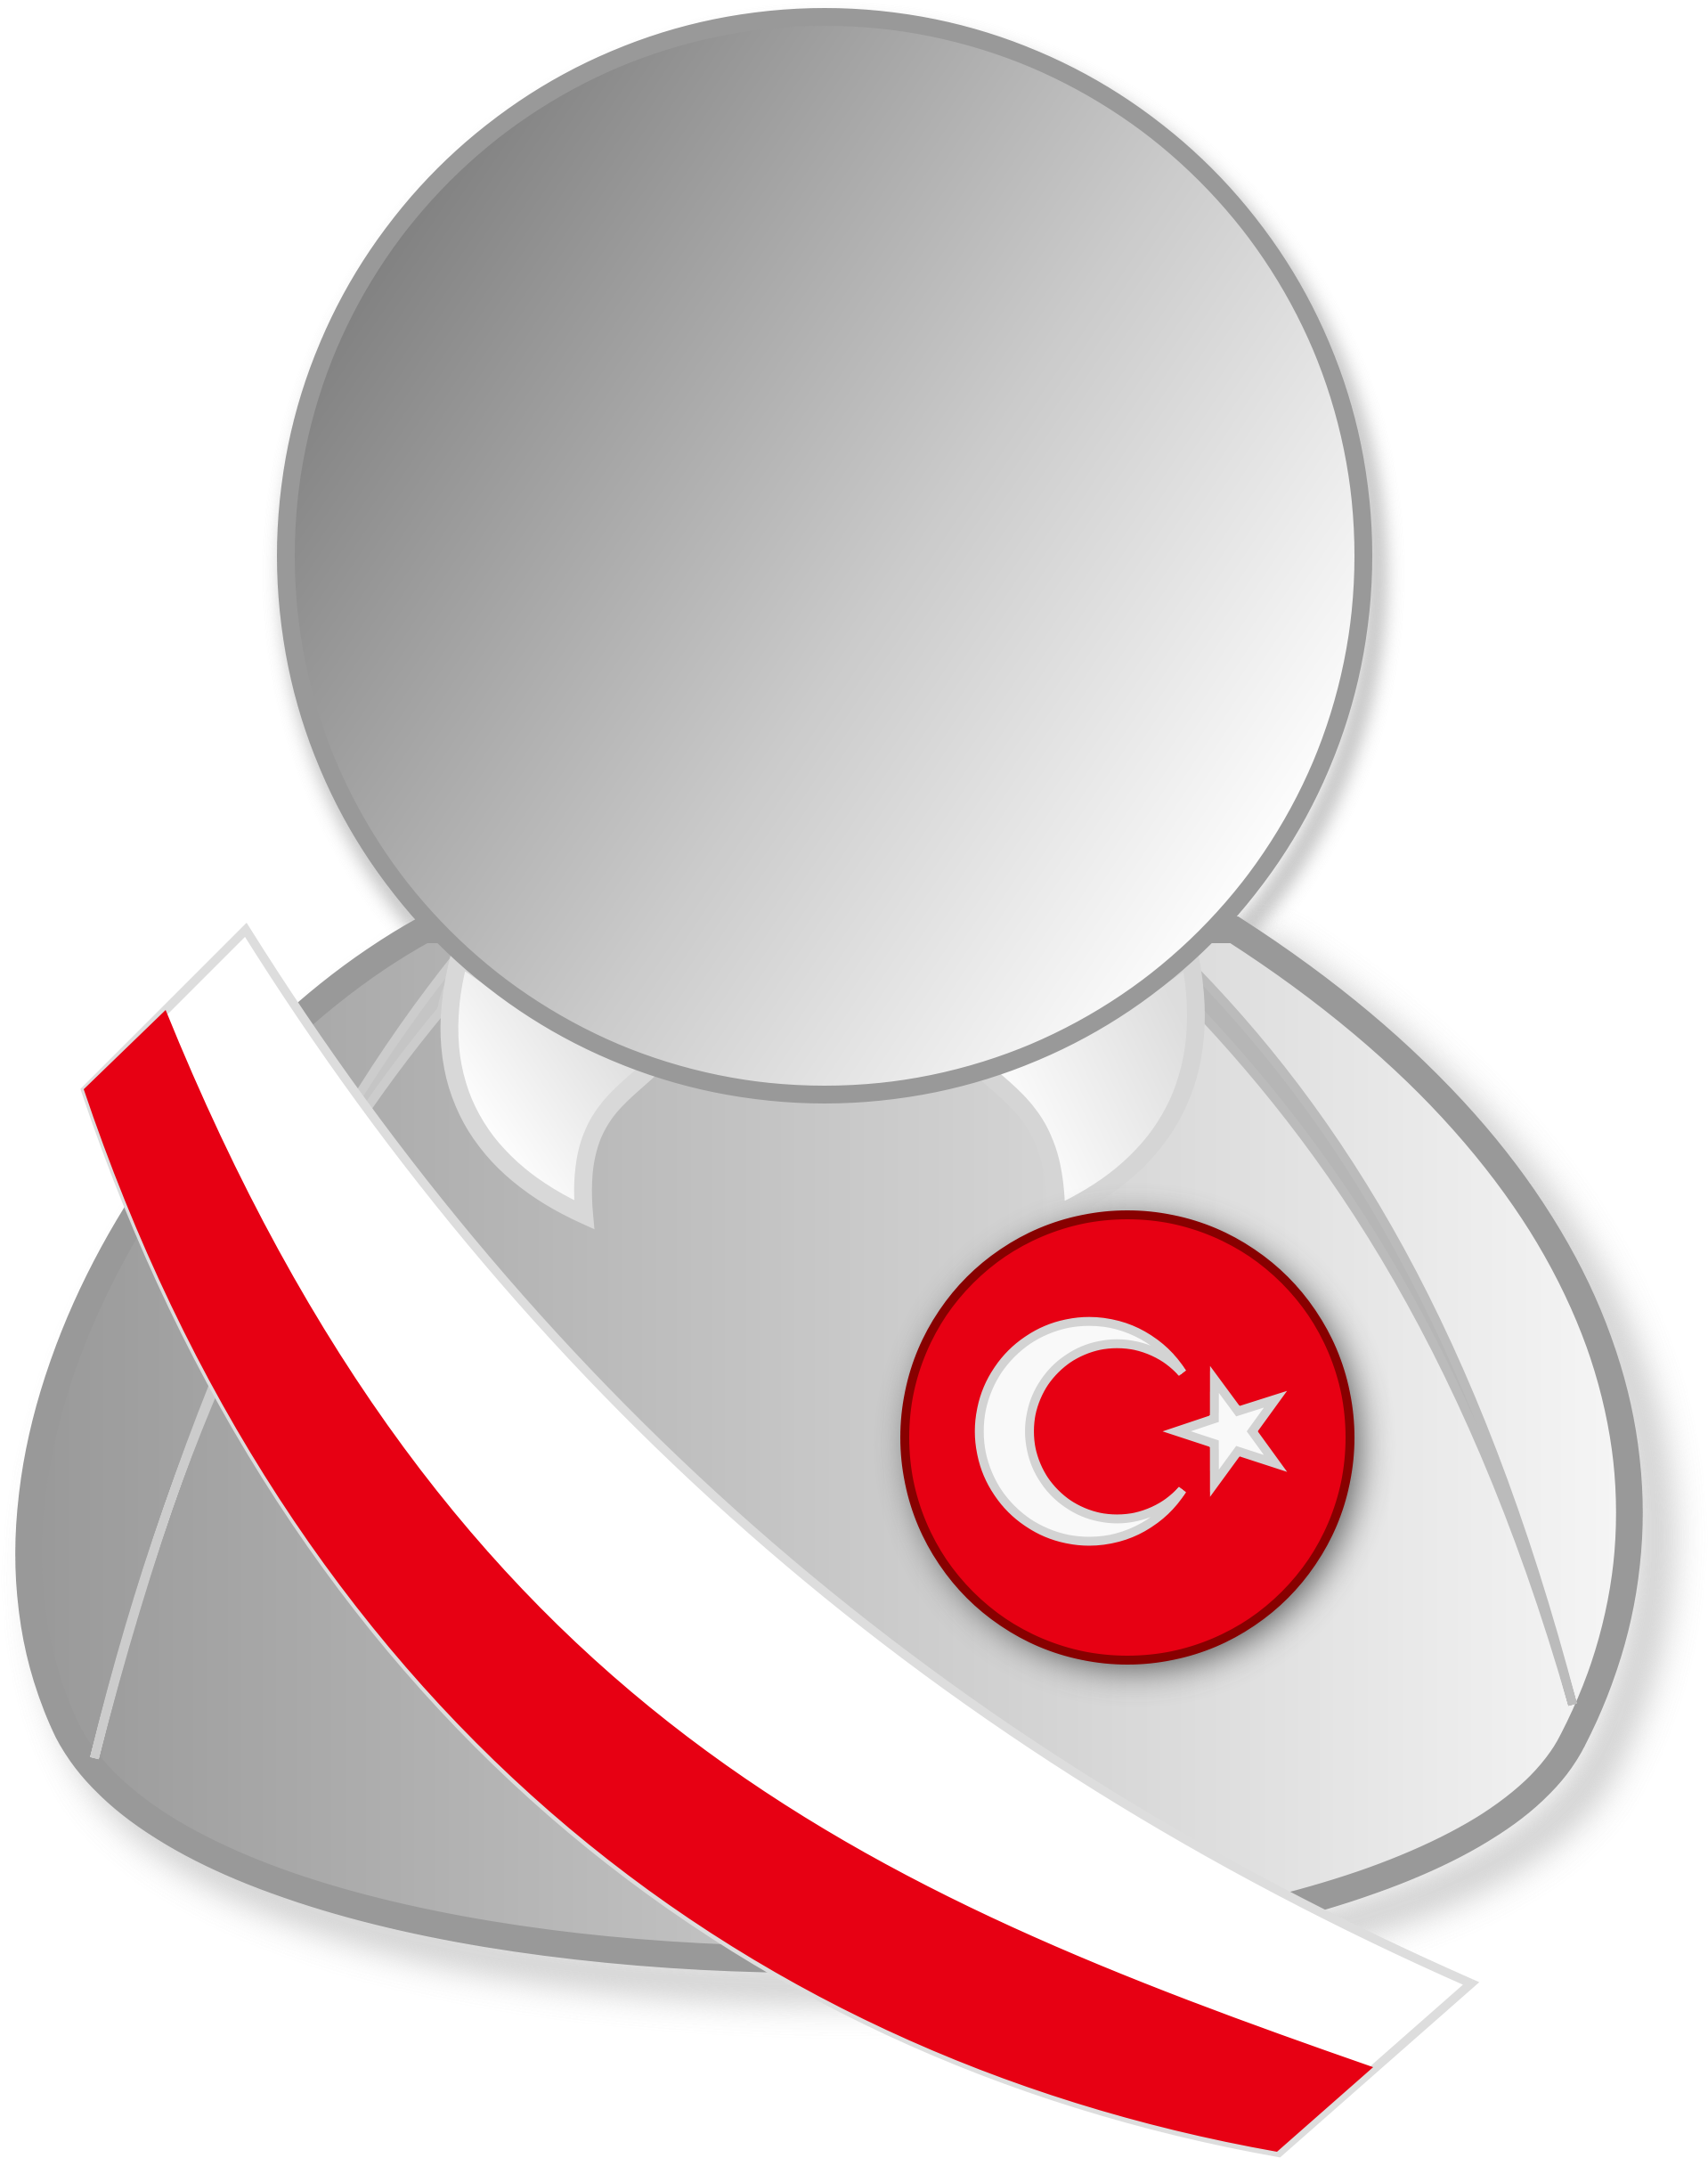 Turkey Politic Personality Icon-flag - Icon, Hd Png Download